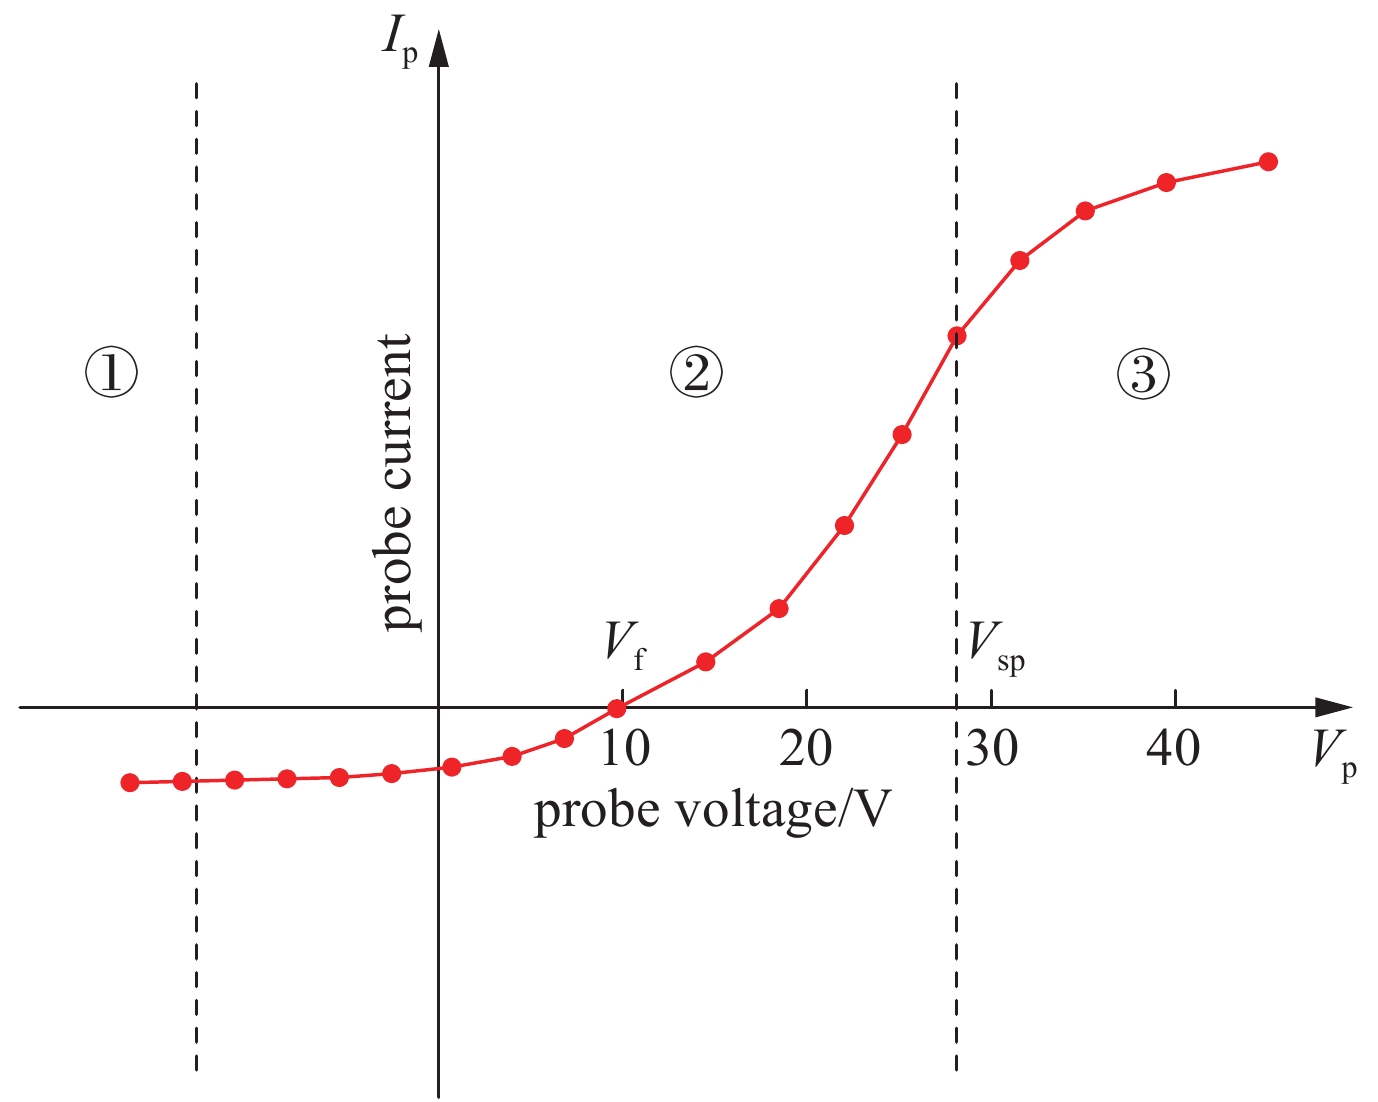 Volt-ampere characteristic curve of the probe operation